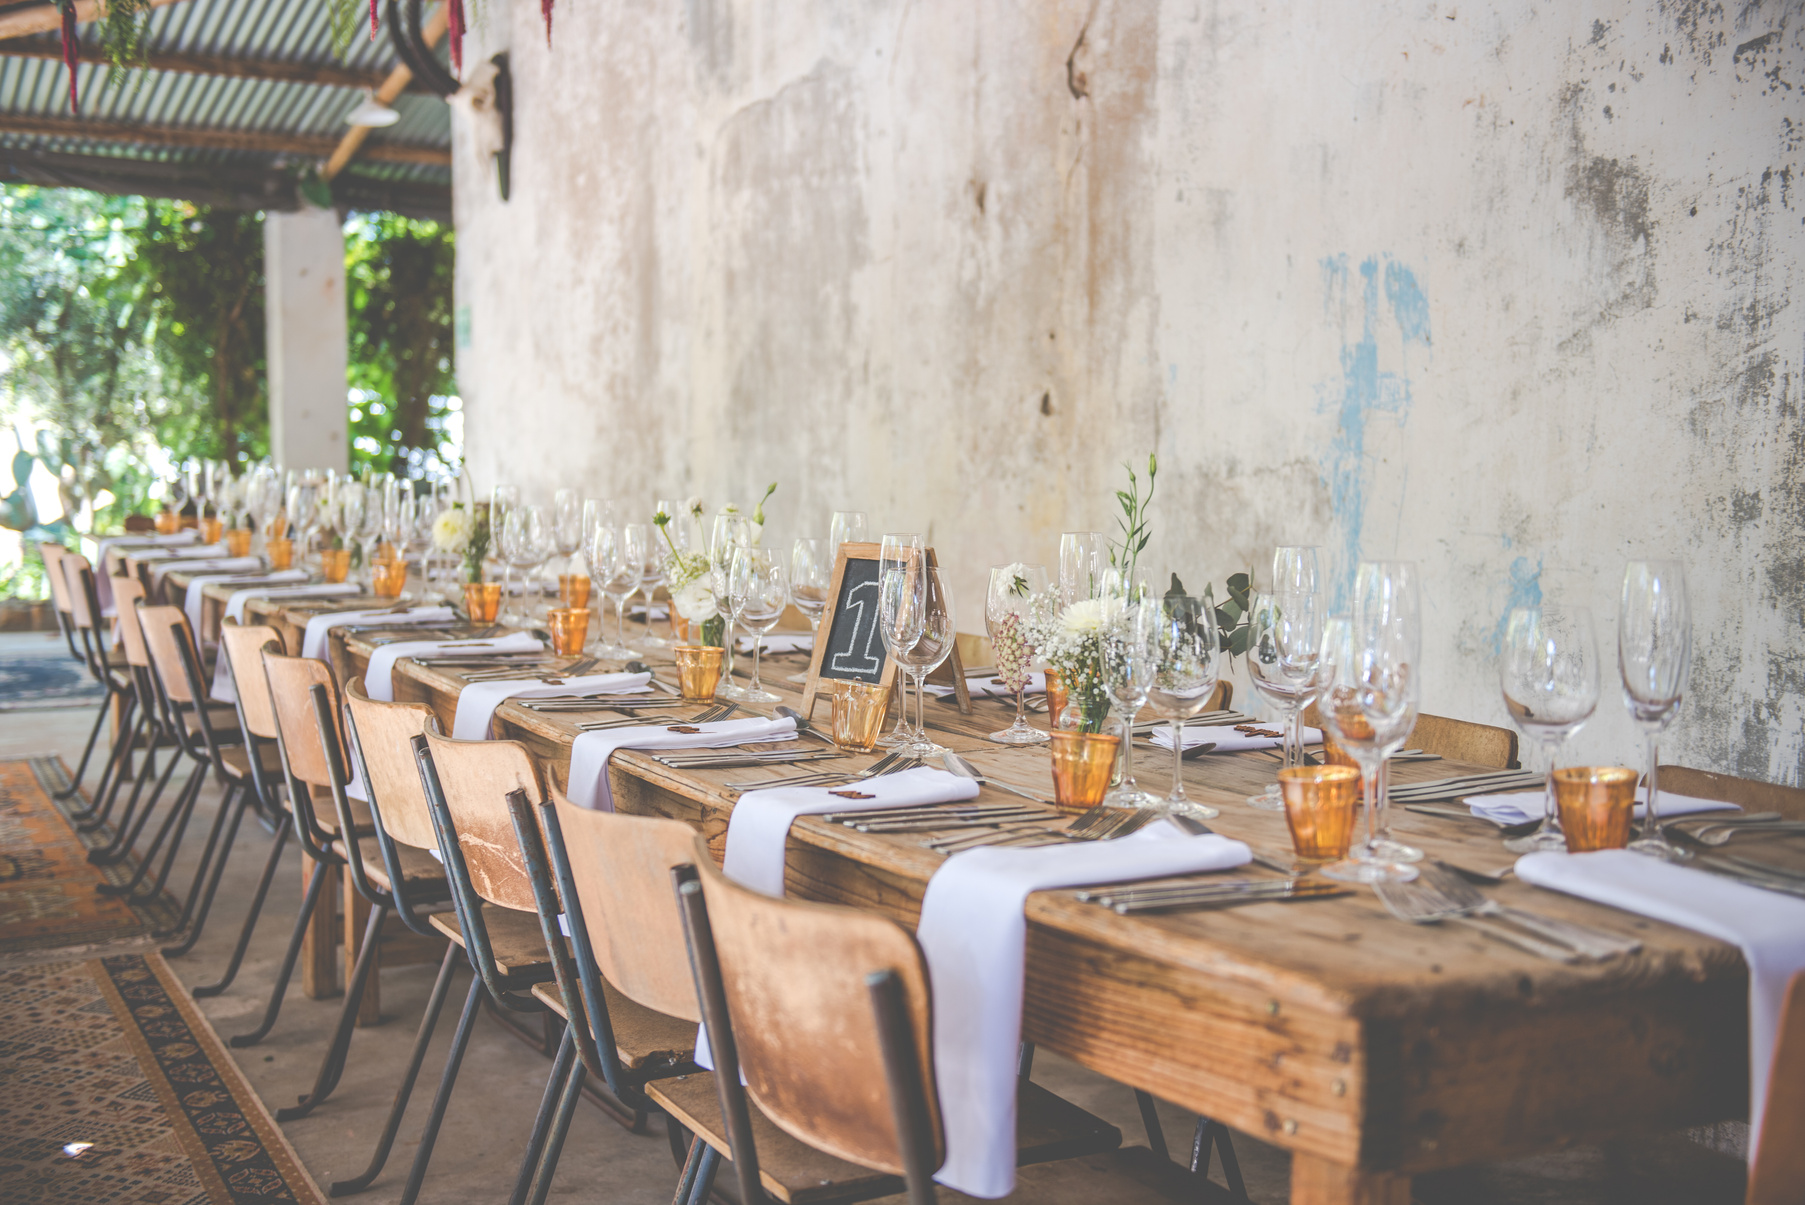 Rustic Style Outdoors Wedding Table Setting 